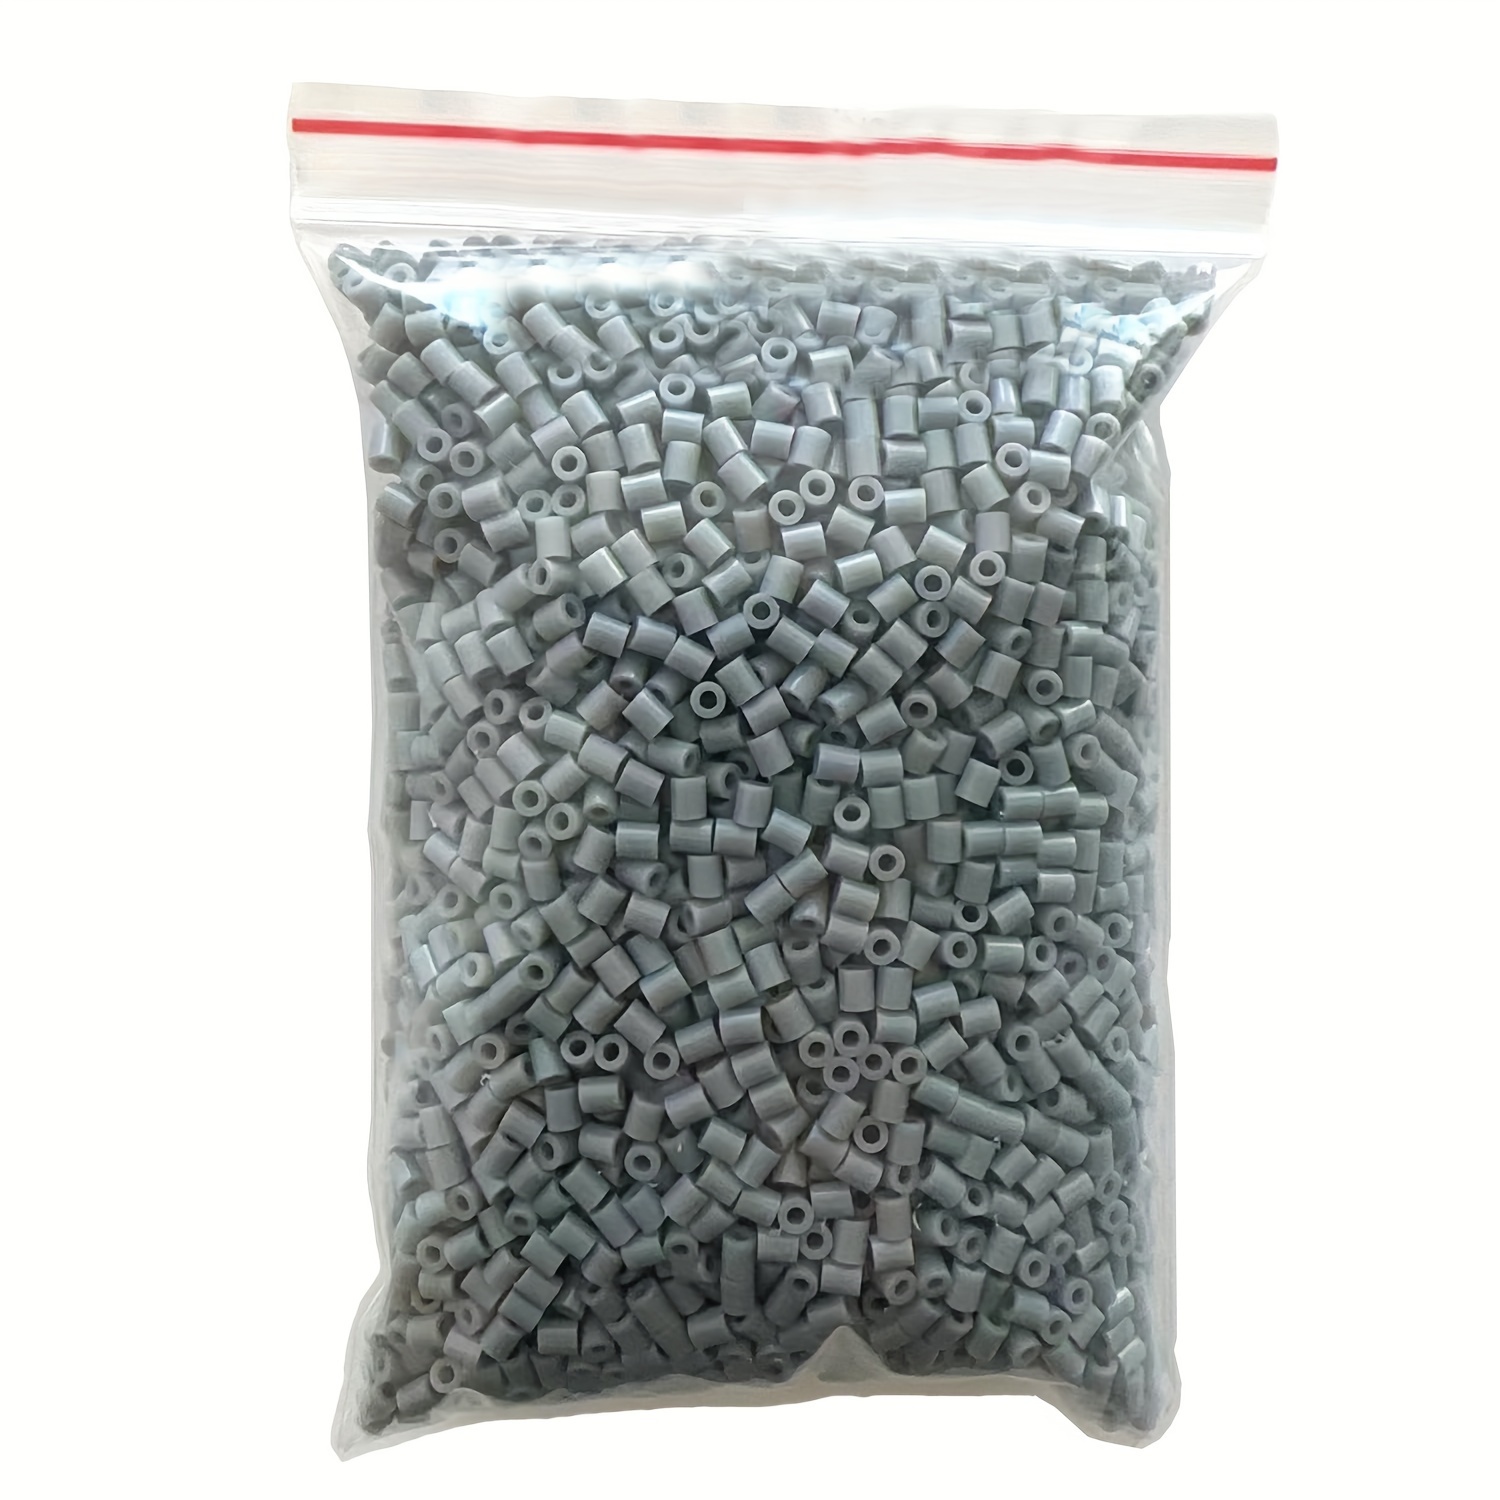 

5000 Pcs Mini Fuse Beads 2.6mm Tiny Fuse Beads Diy Iron Beading Iron Melting Beads For Jewelry Making, Ideal Gifts For Friend